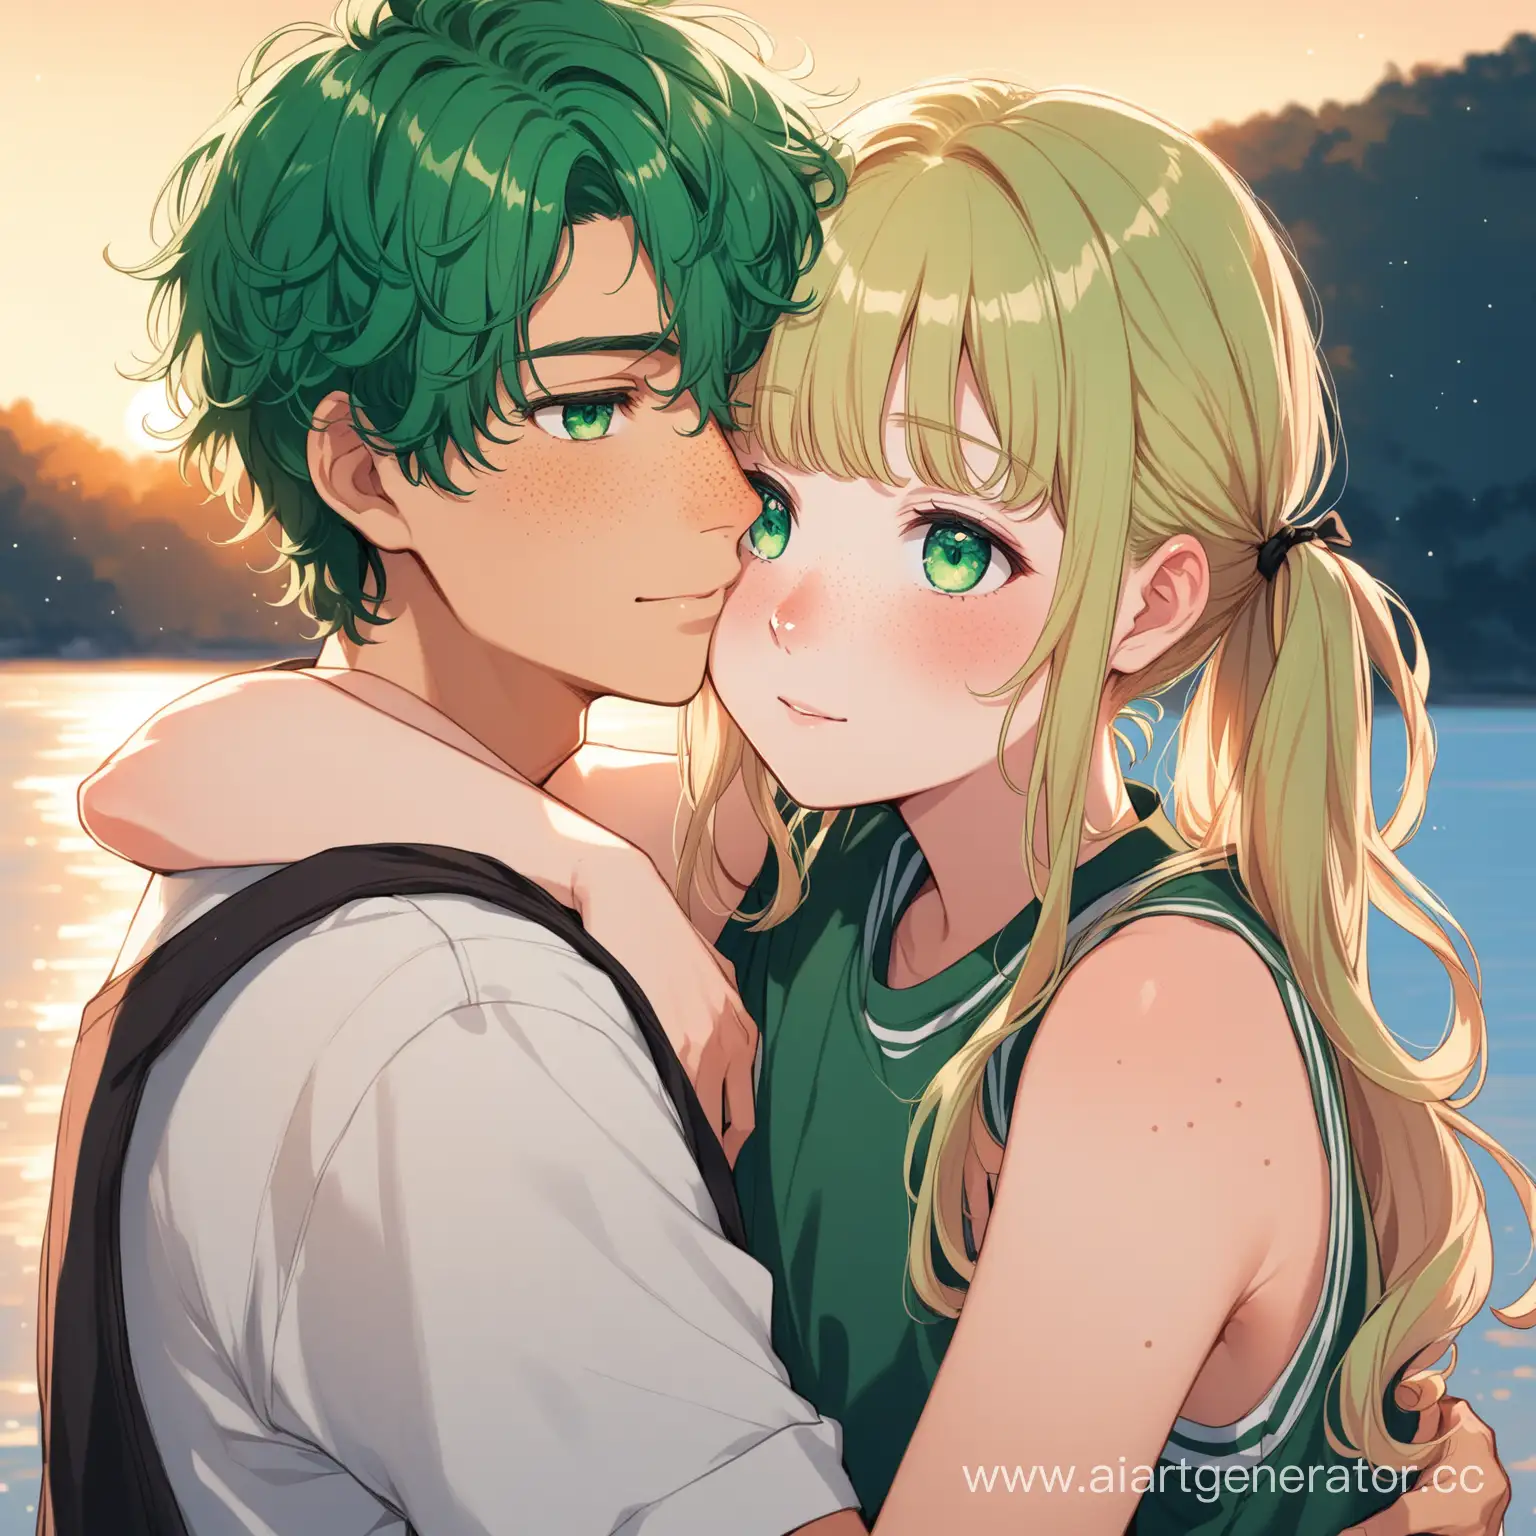 Curly-GreenHaired-Boy-and-Blonde-Pigtailed-Girl-in-Warm-Embrace